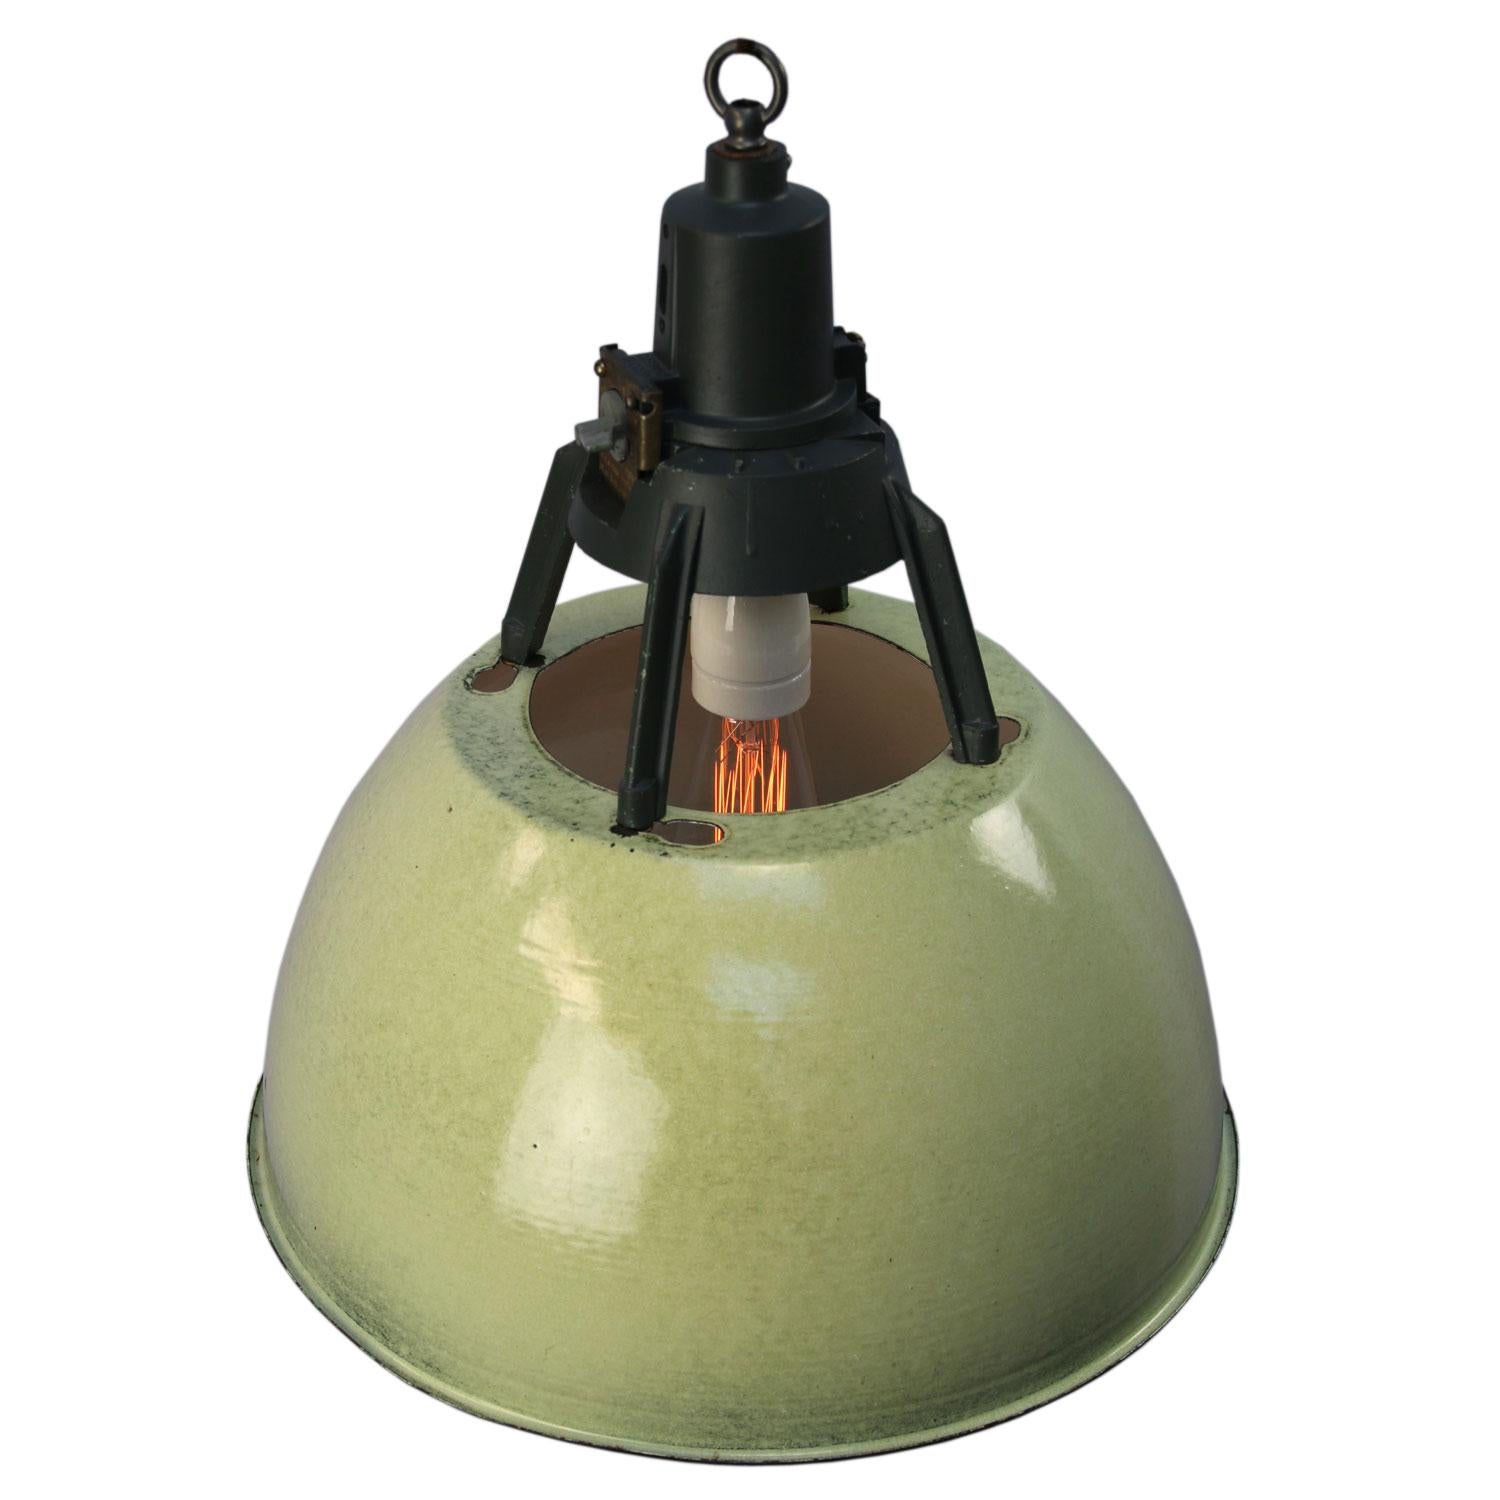 Enamel Industrial pendant.
Yellow green enamel shade, white inside.
Dark grey cast aluminum top.

Weight: 2.90 kg / 6.4 lb

Priced per individual item. All lamps have been made suitable by international standards for incandescent light bulbs,